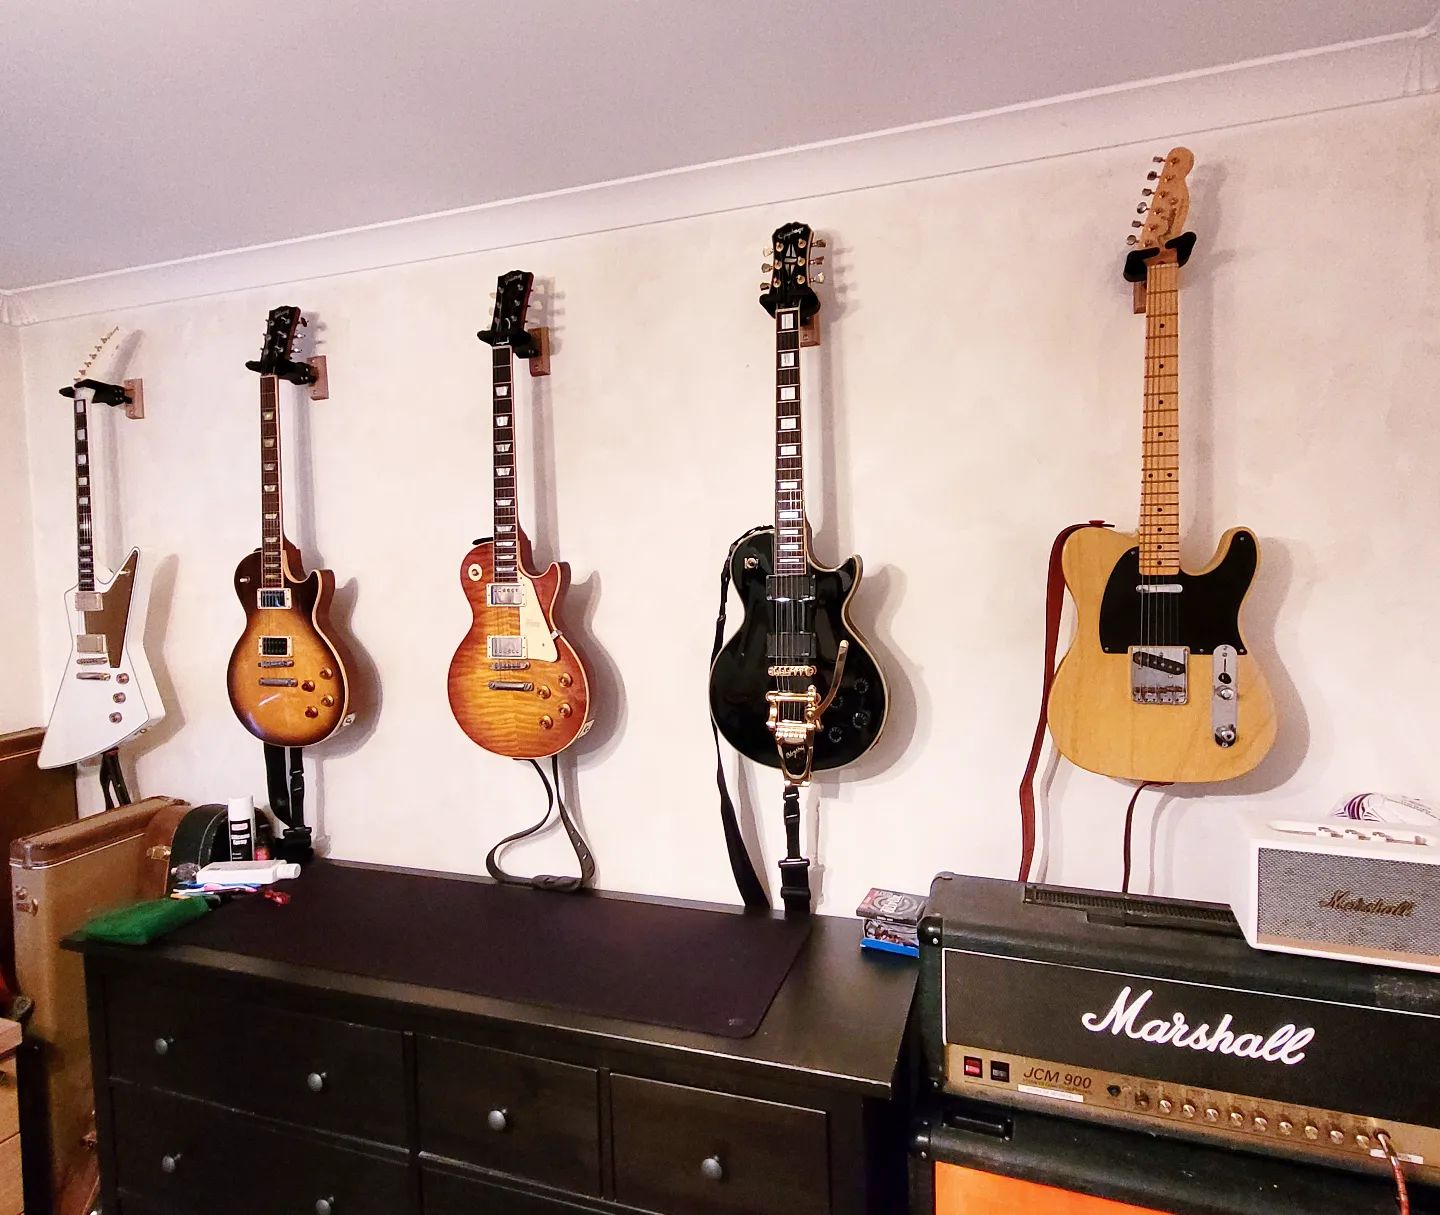 Guitar collection on the wall... 
Left to right 

@Gibson @officiallzzyhale #LzzyHaleExplorer

@Gibson #1960 #LesPaulClassic

@gibsoncustom #Reissue59 

@epiphone #LesPaulCustom @bigsby @emgpickups @vibramate 

@fender #AVRI #1952Telecaster 

And just in shot is my @marshallamps_uk #JCM900 #4100 

All hanging on @herculesstands  special thanks to @stringsandthingsltd for the replacement stand recently. 👍